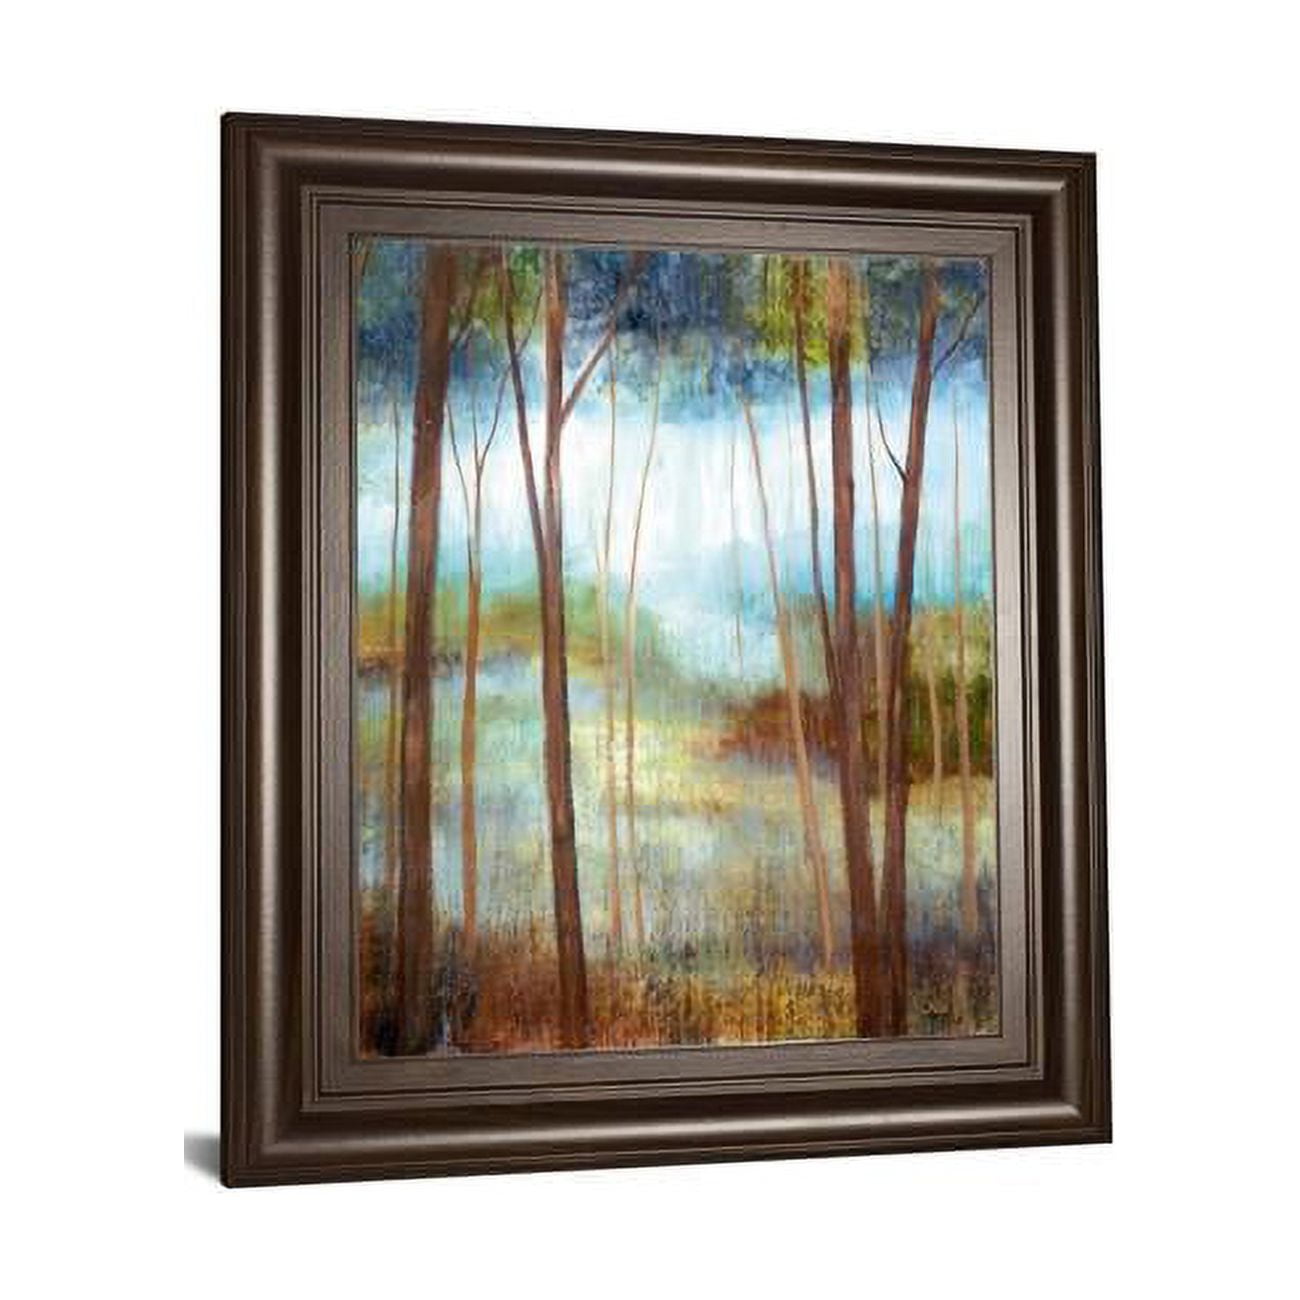 Picture of Classy Art 8441 22 x 26 in. Soft Forest II by Nan Framed Print Wall Art